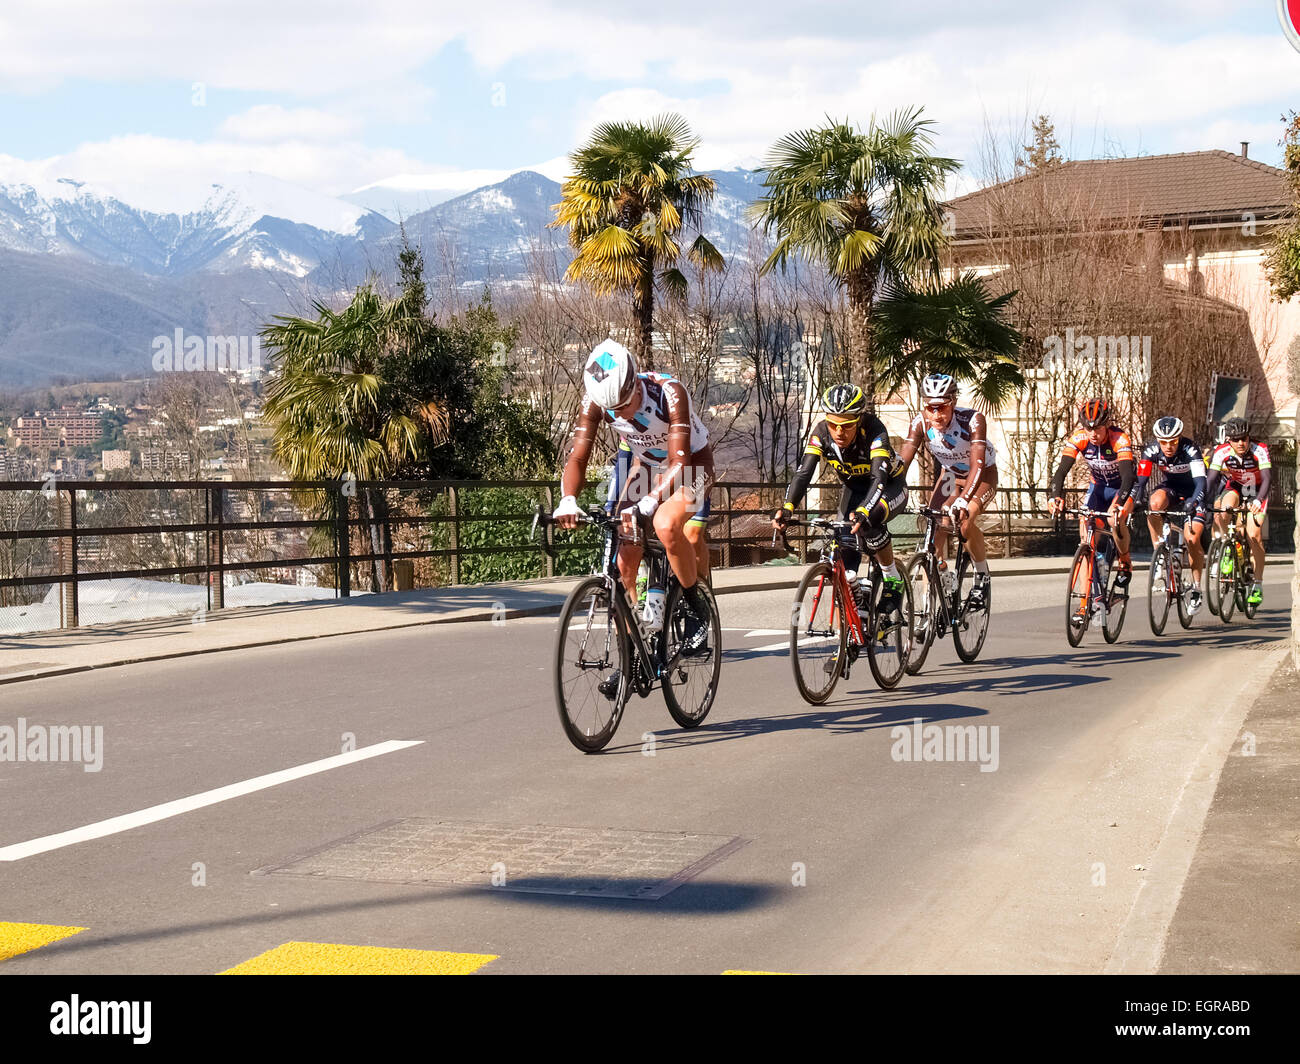 Lugano, Switzerland - March 01, 2015: Cycling race "Grand Prix of Lugano in 2015," This is the 69th edition and takes place along the streets of the city on the banks of Lake Lugano. A beautiful sunny day accompanies the exhibition. Credit:  Mauro Piccardi/Alamy Live News Stock Photo